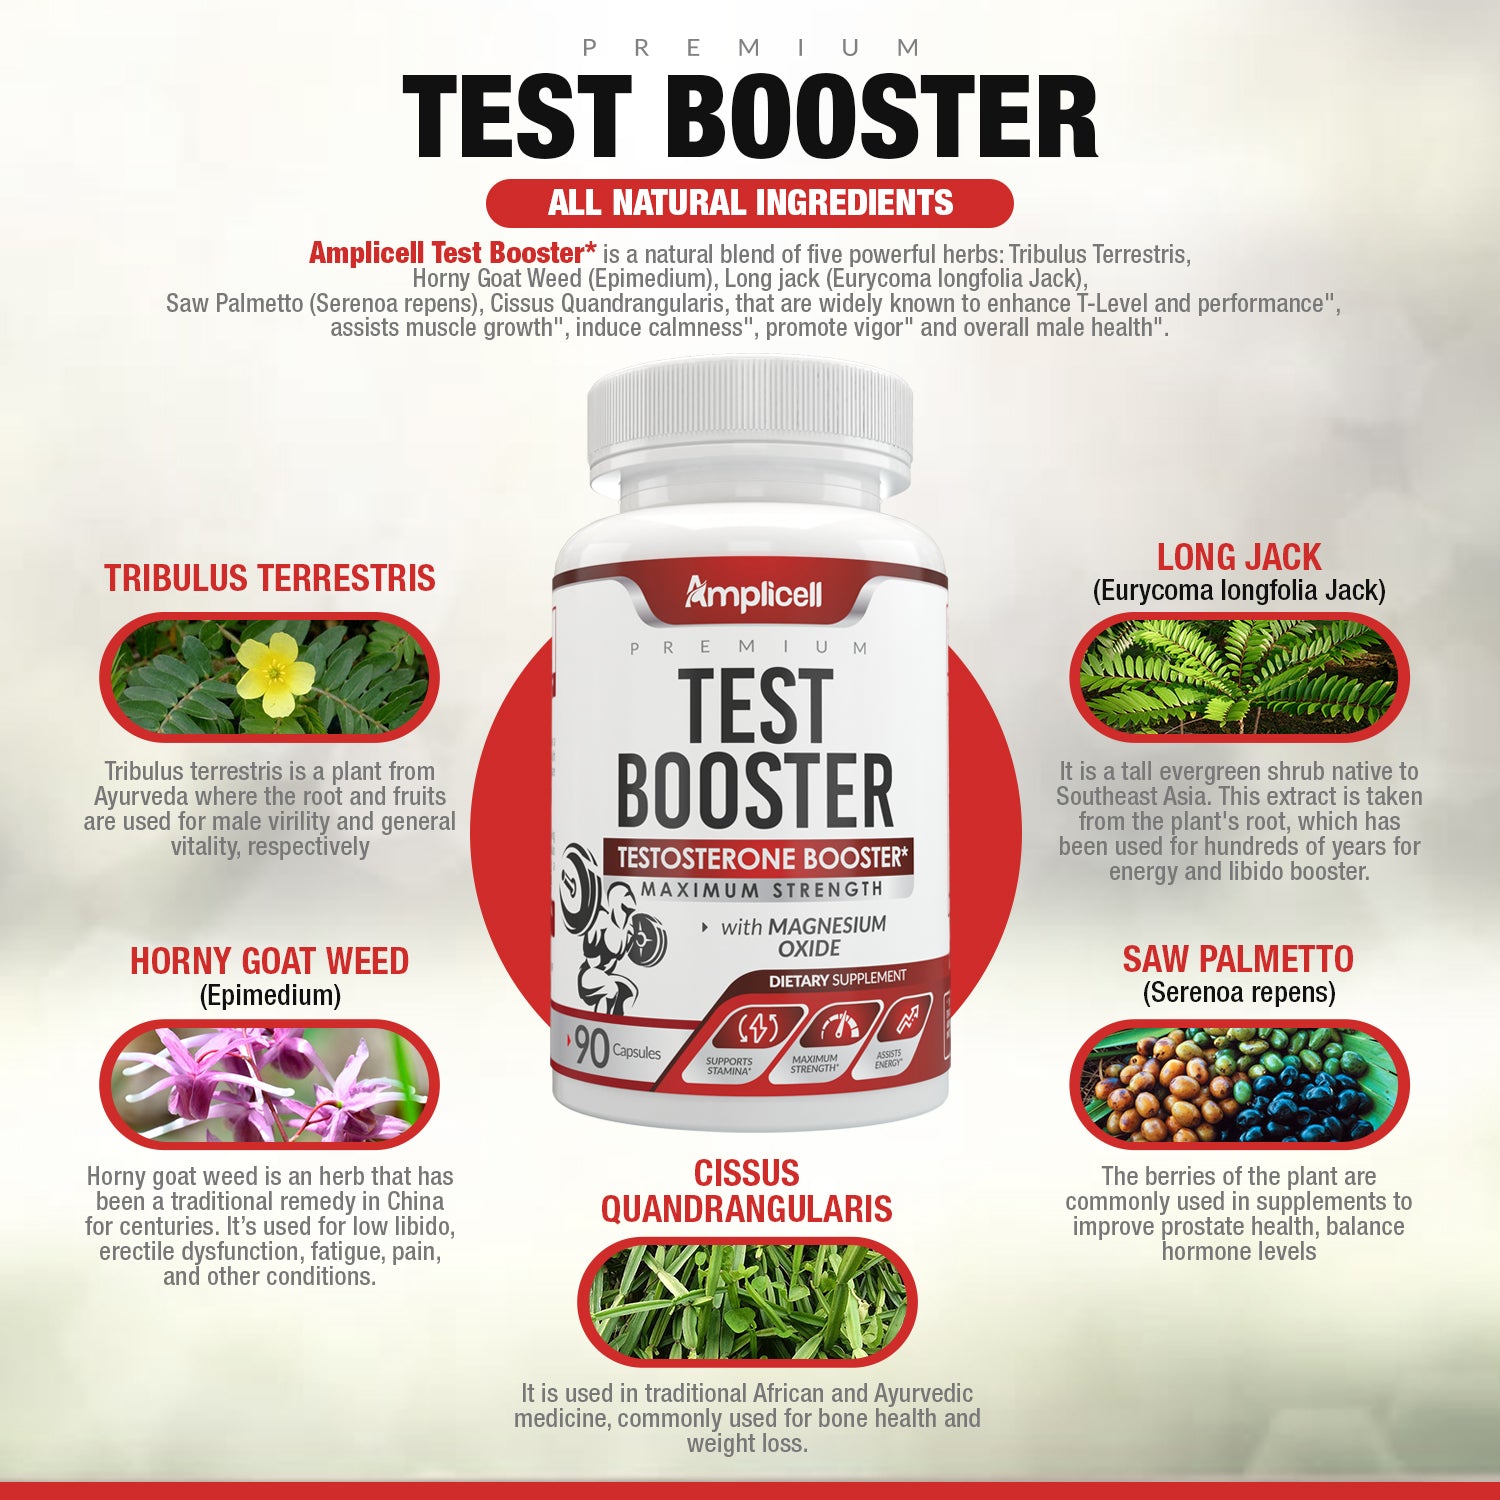 Amplicell Max Strength Test Booster Amplicell